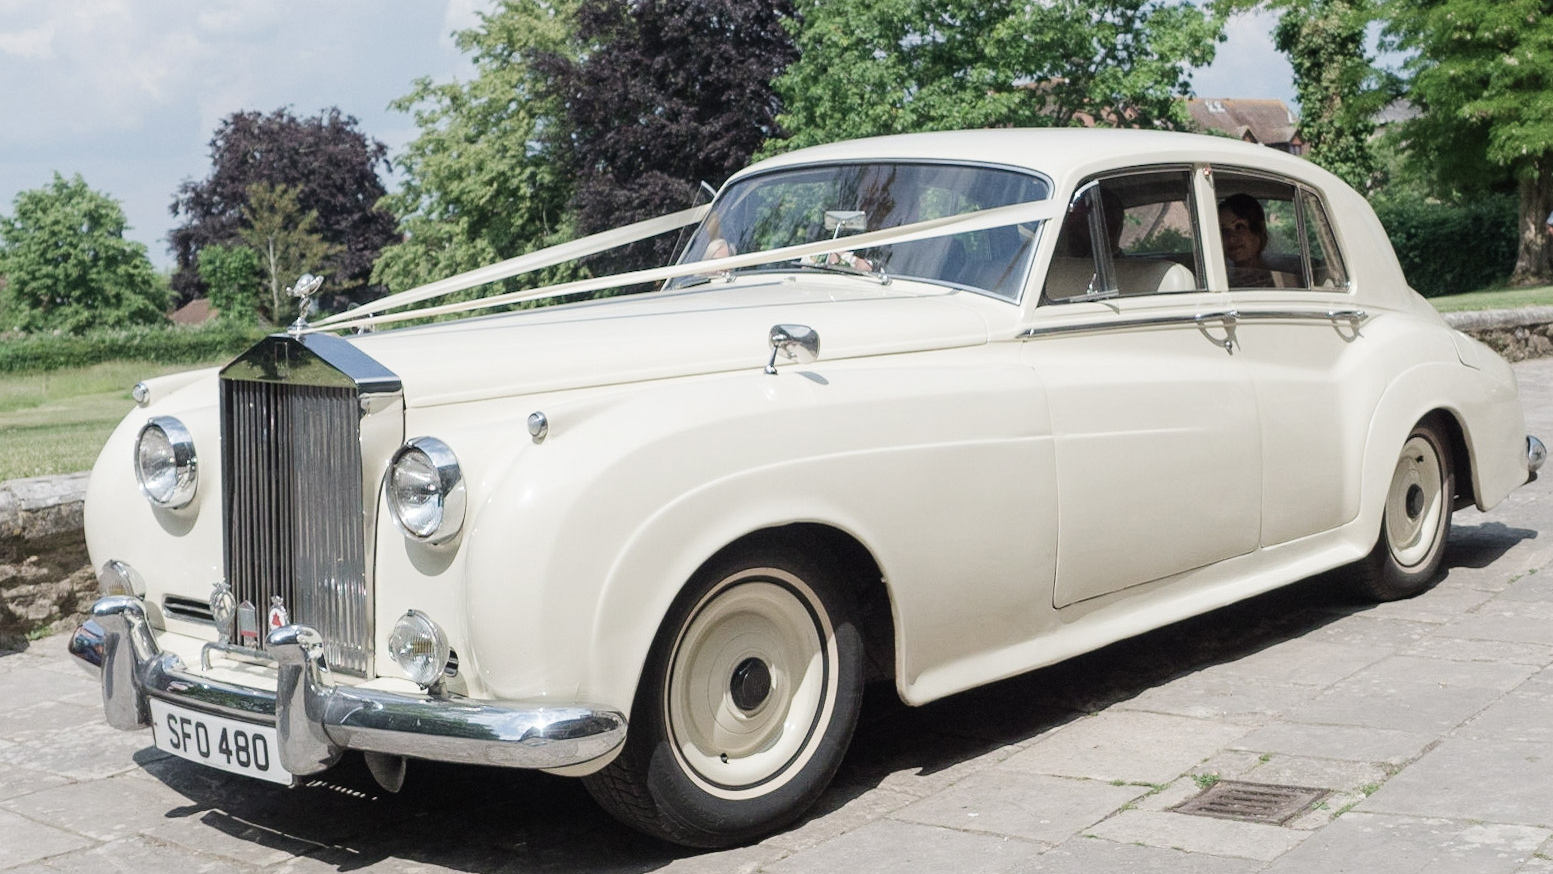 Classic Old English White Rolls-Royce Silver Cloud decorated with Ivory ribbons. Bride can be seen at the rear of the vehicle and chauffeur at the front